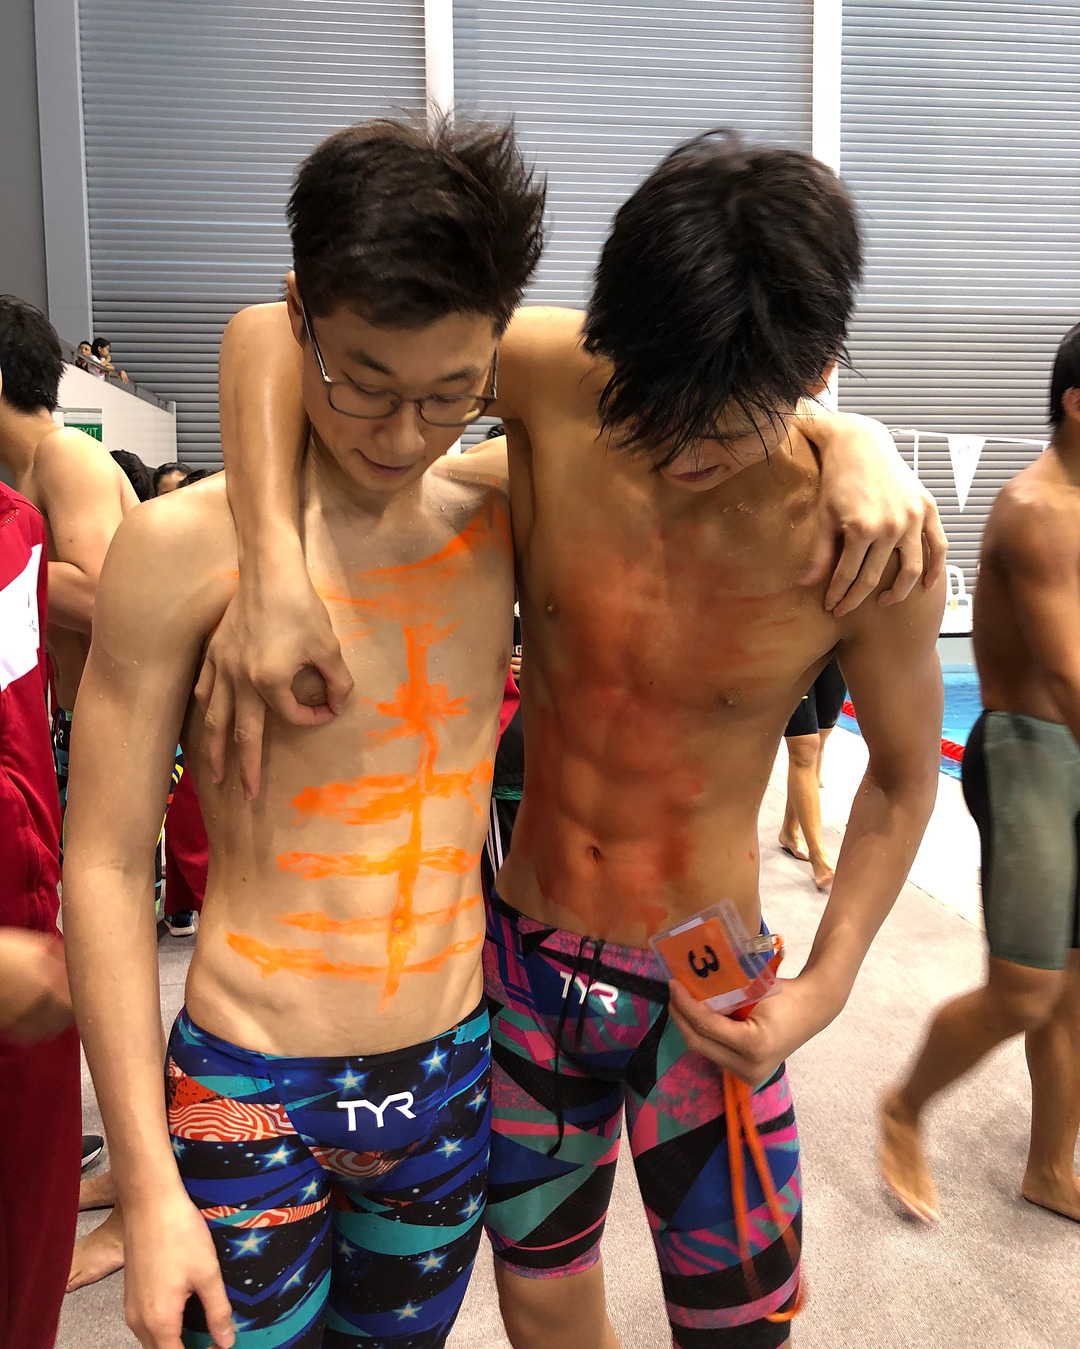 sjiguy: Owen Teo seems to have taken a liking to Ritchie Oh’s nipple.